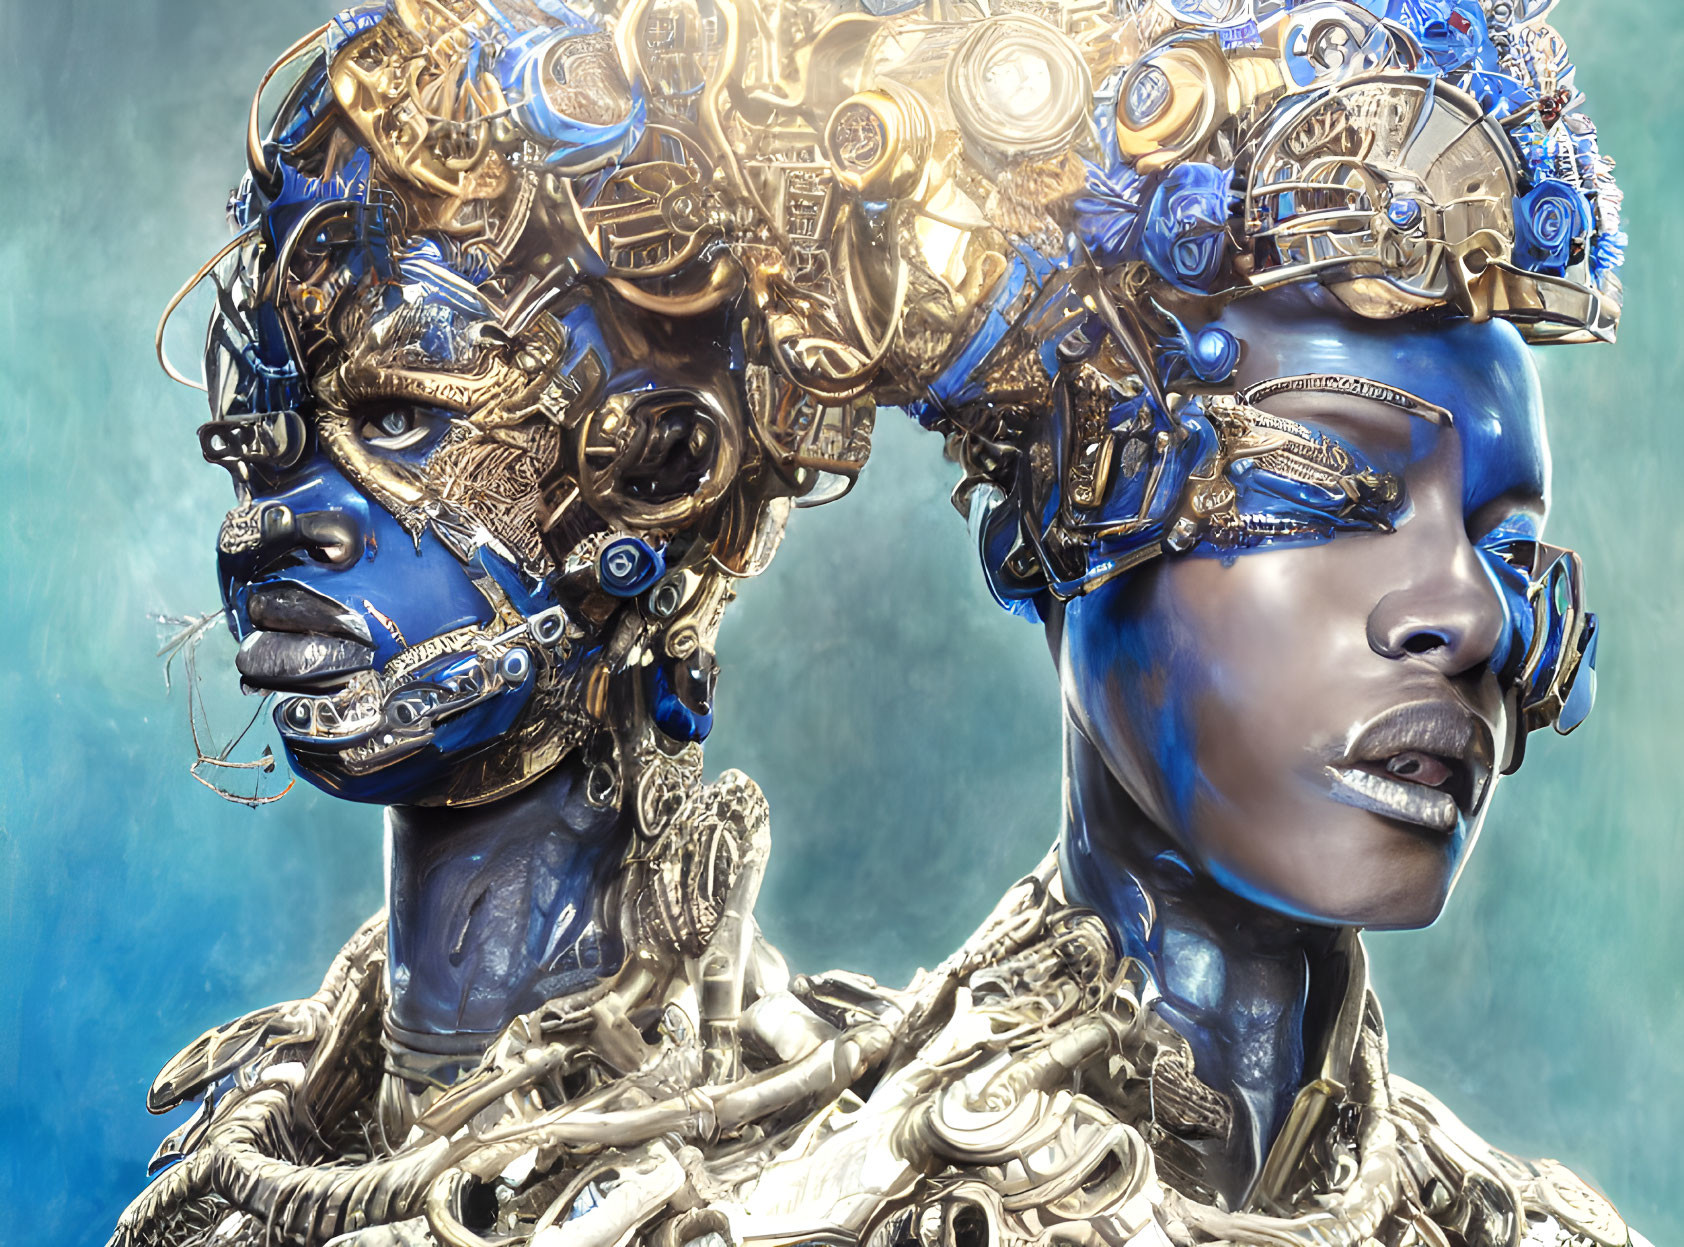 Cyborg-Themed Art: Two Figures with Metallic Details